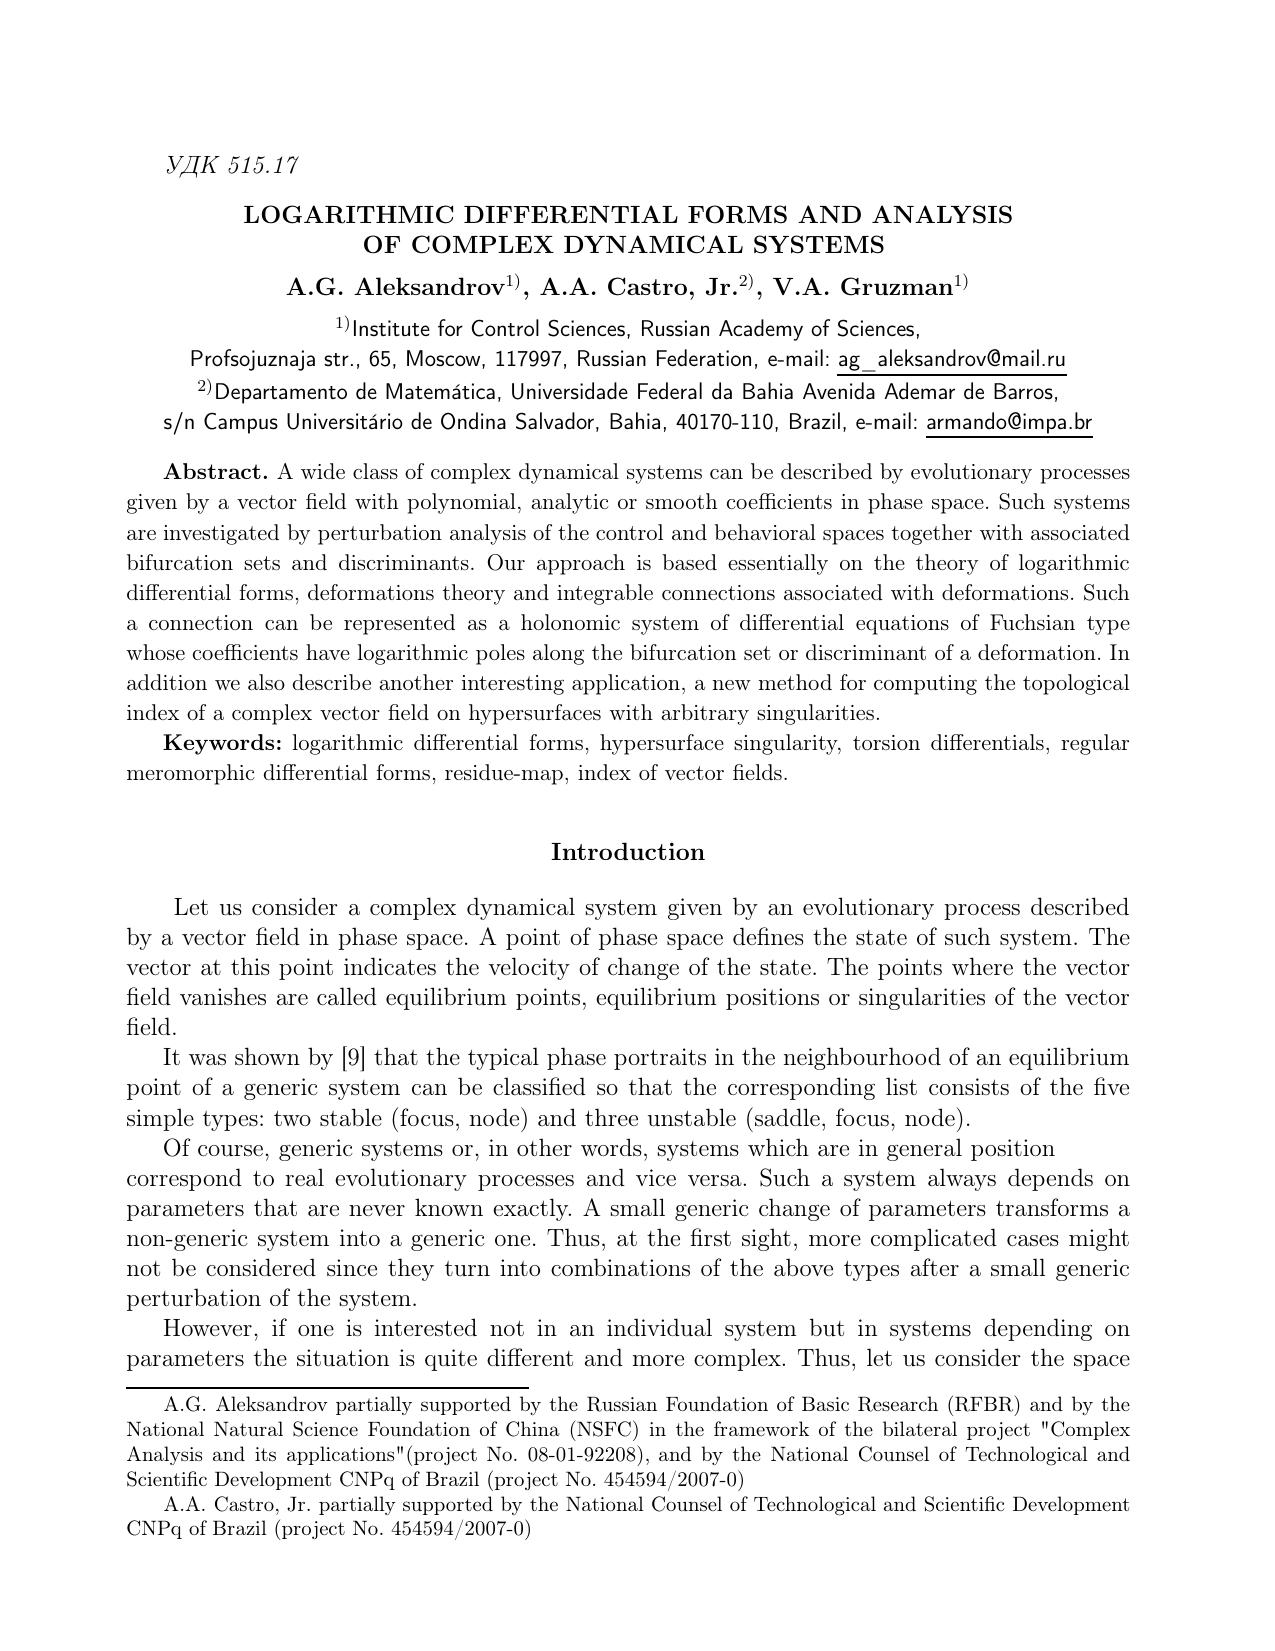 Logarithmic Differential Forms and Analysis of Complex Dynamical Systems